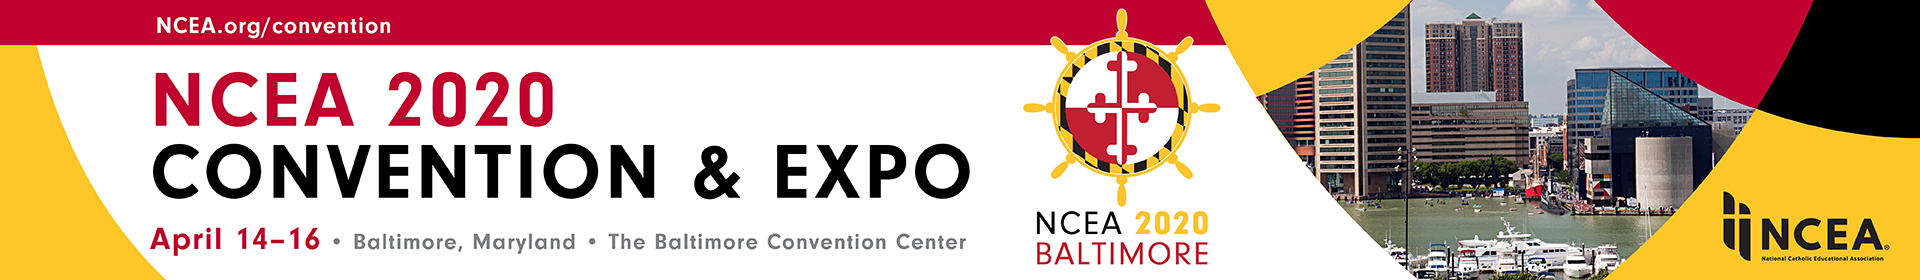 NCEA 2020 Convention & Expo Event Banner